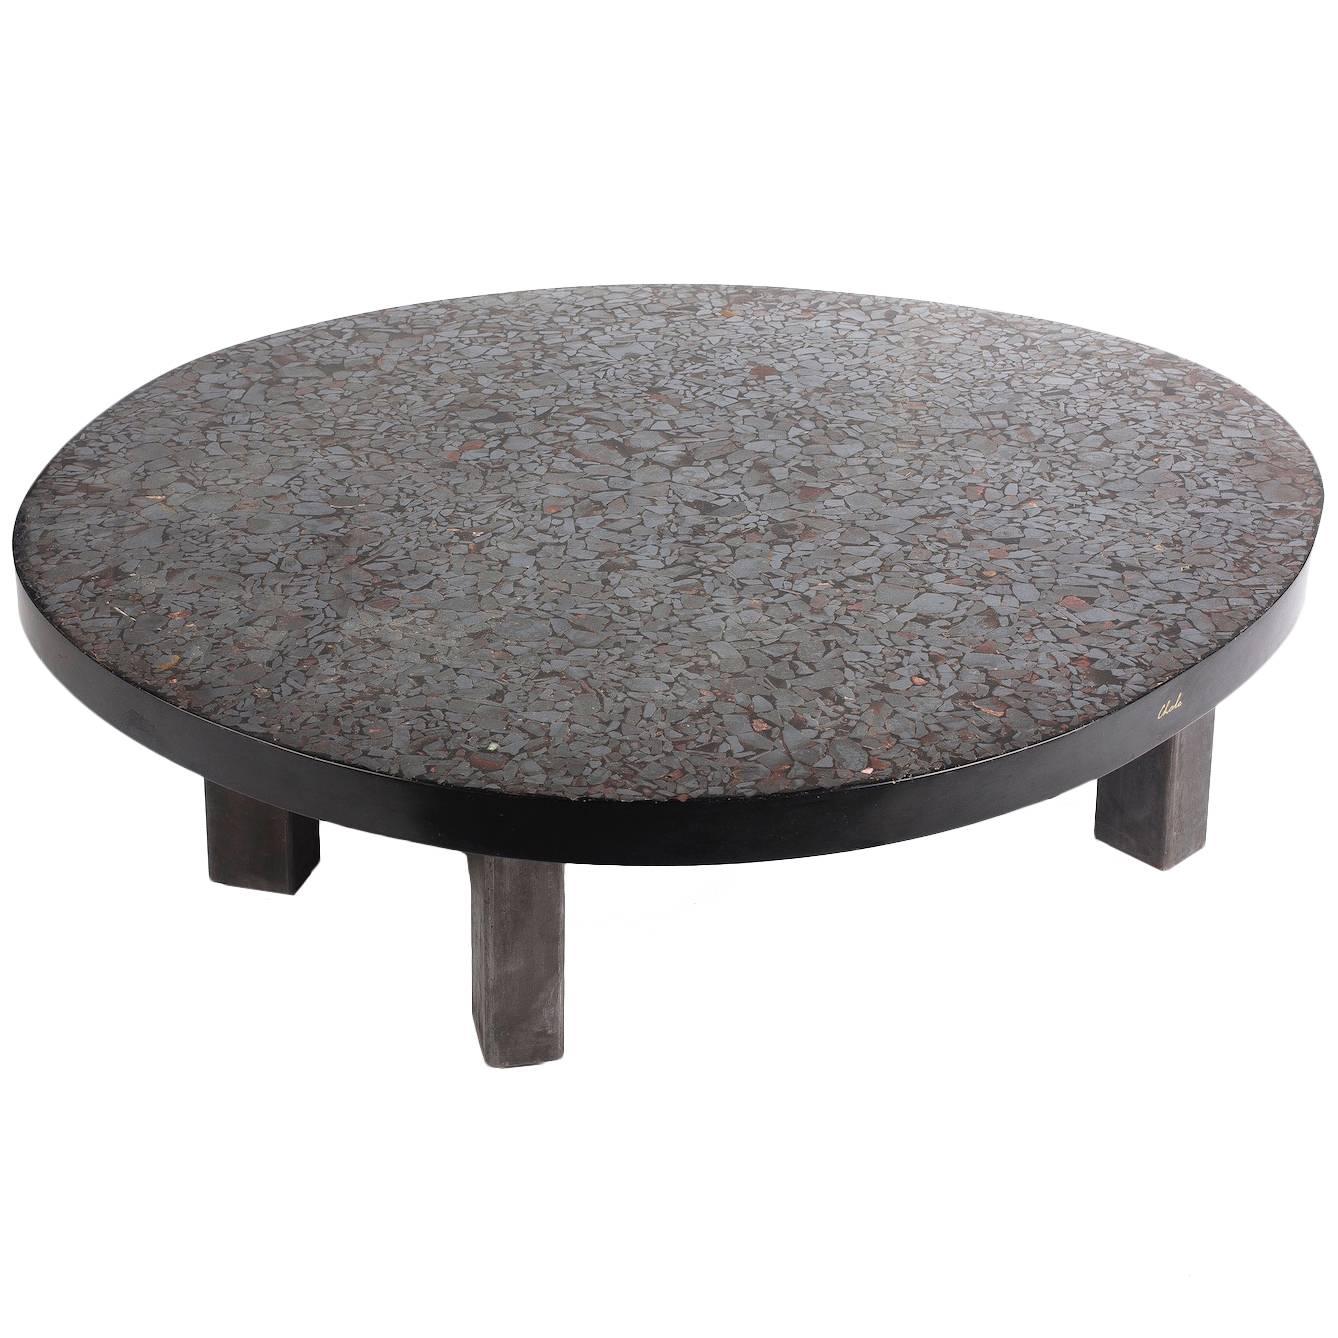 "Hematite" Top Table by Ado Chale "Signed on the Edge, " circa 1980